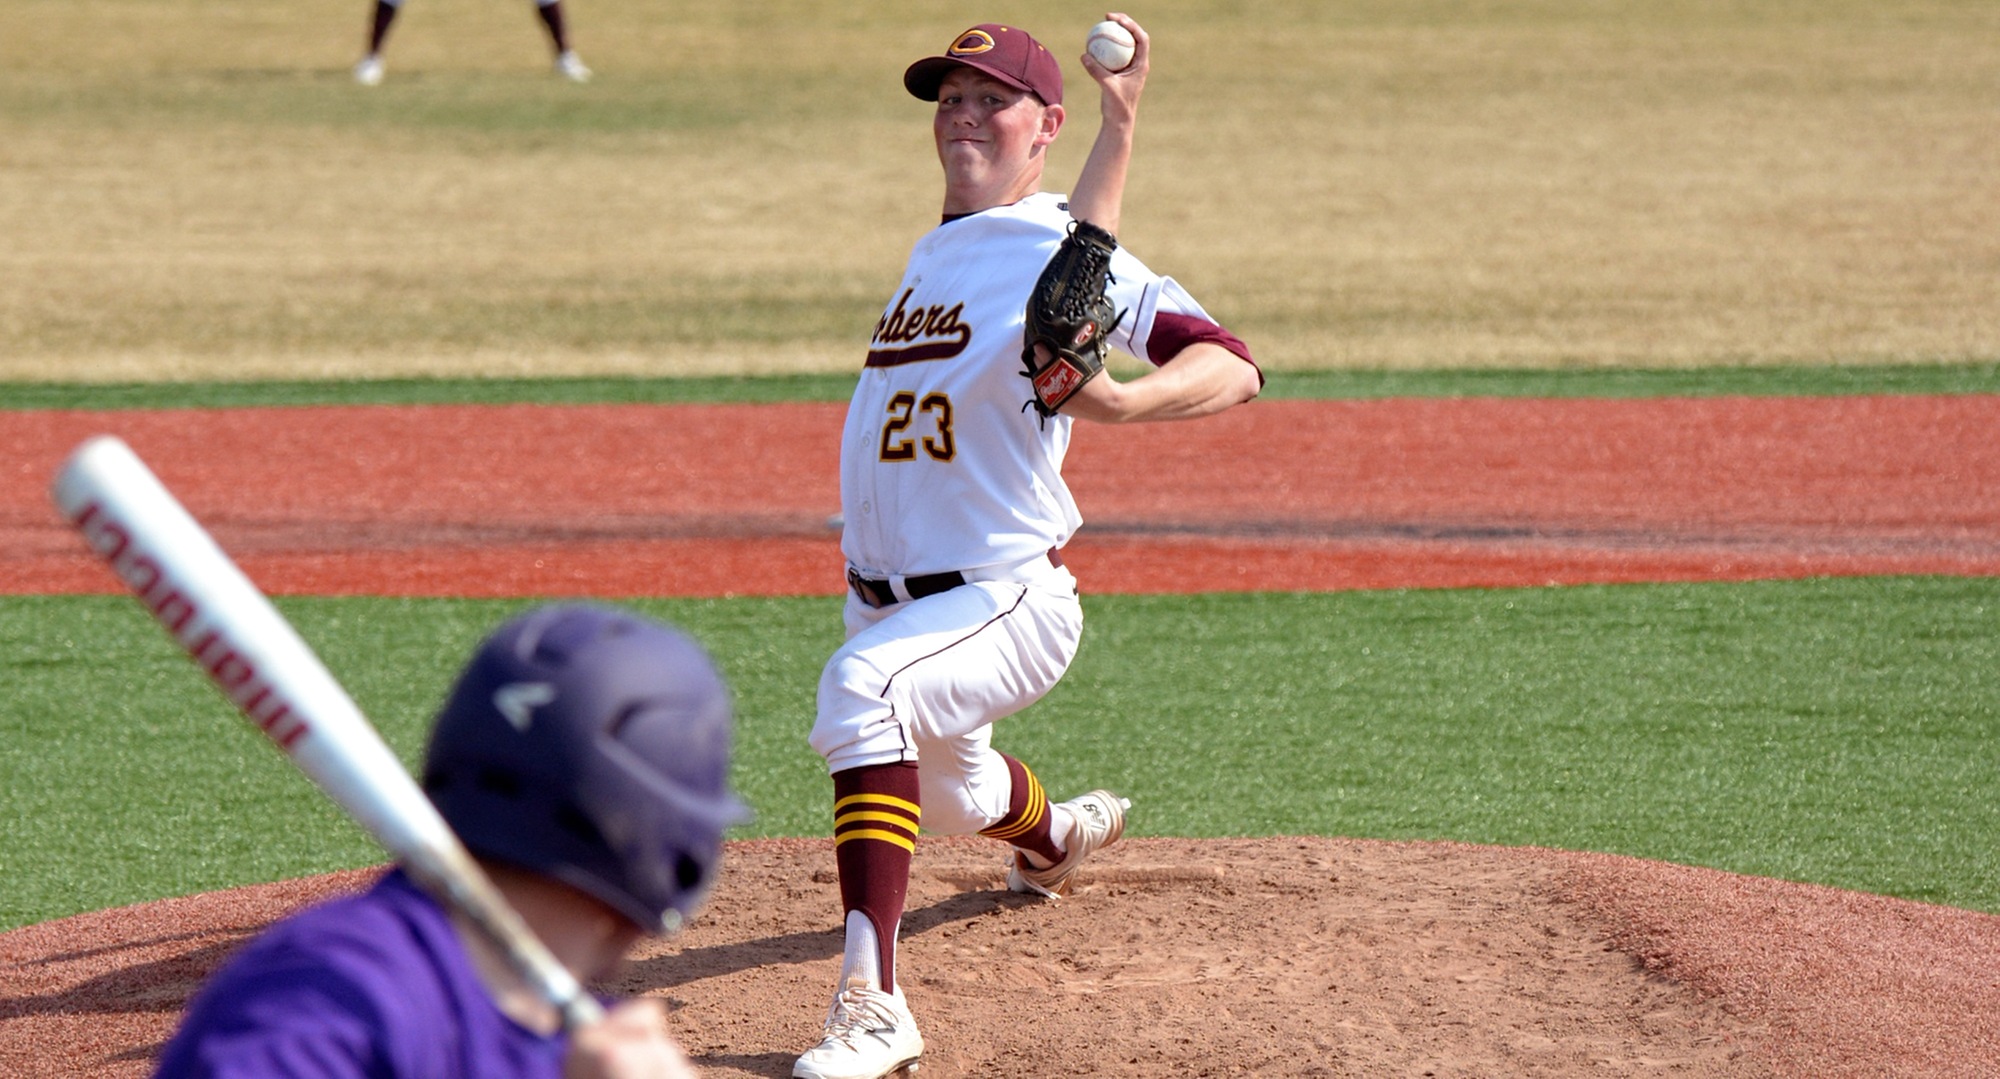 Cole Christensen pitched a complete-game four hitter and retired the final 11 batters he faced in the Cobbers' split at Hamline.